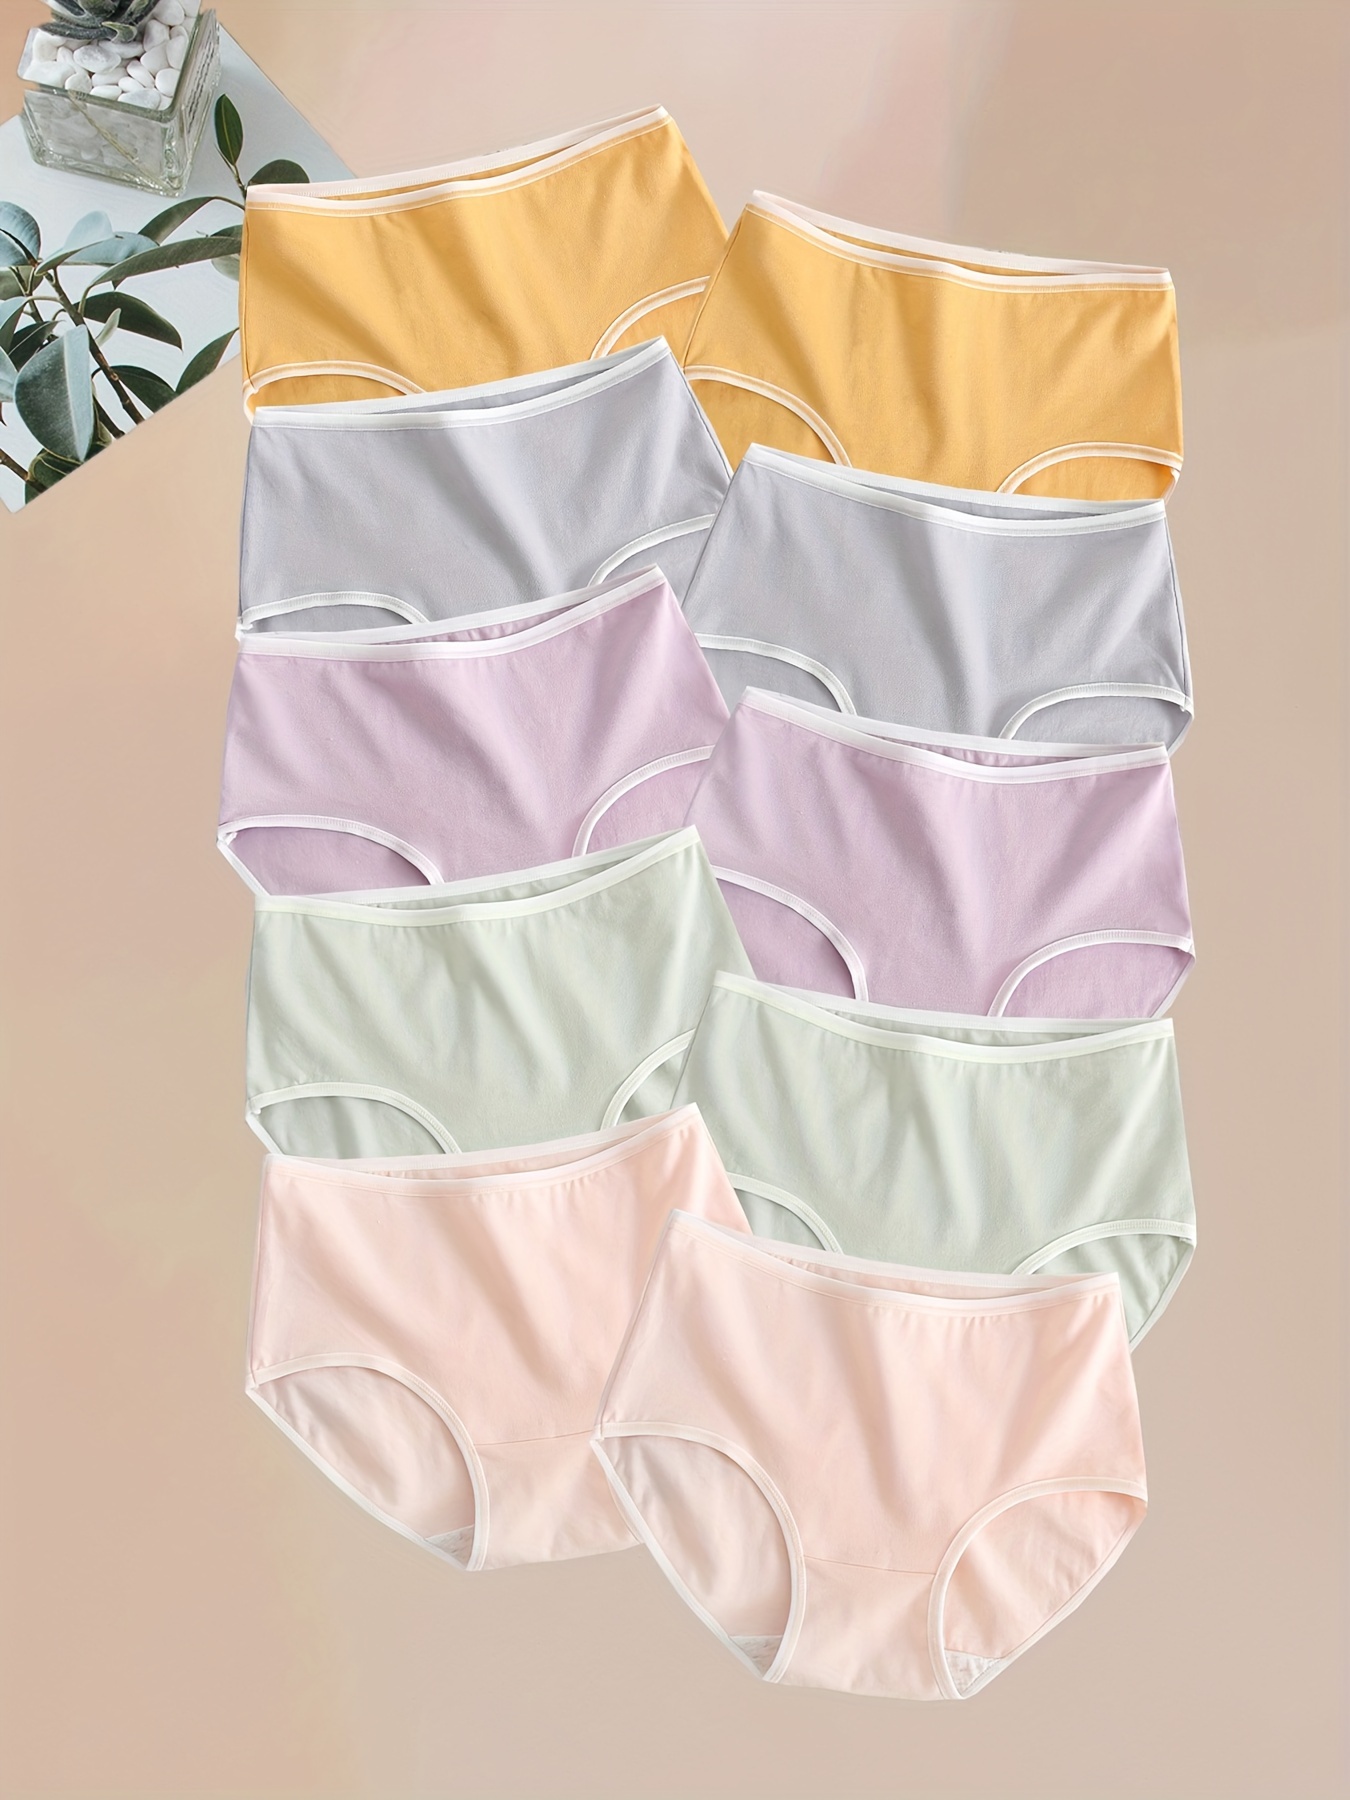 10-Pack Women's Simple Comfy Breathable Stretchy Panties only